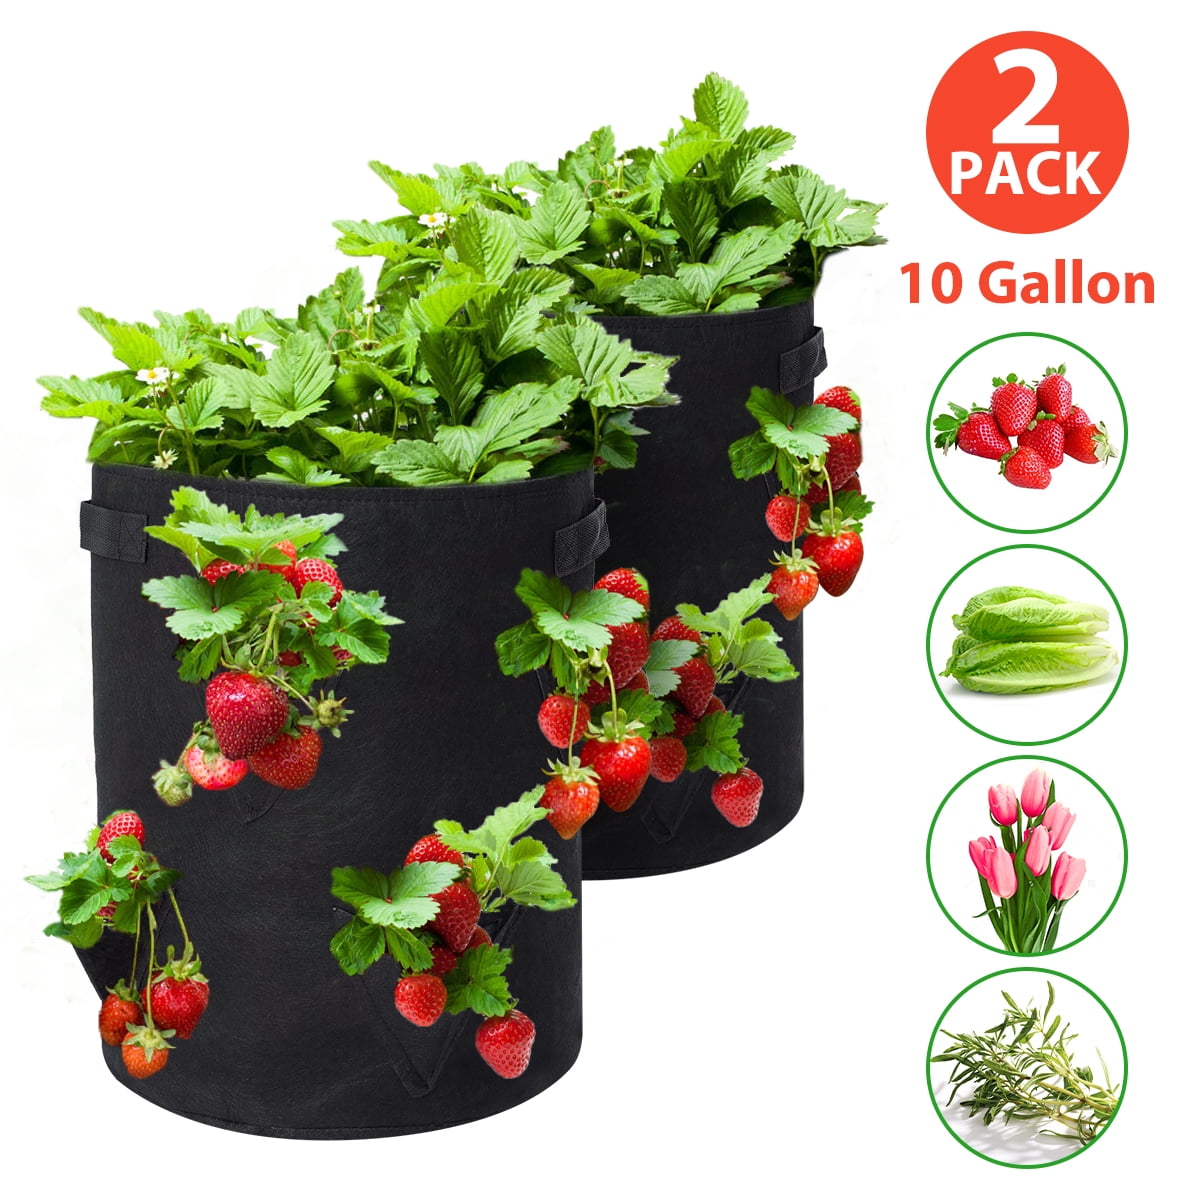 Lot of 10-1 Gallon Durable Fabric Pots Grow Bags 6" Wide x 7 1/2" Height 